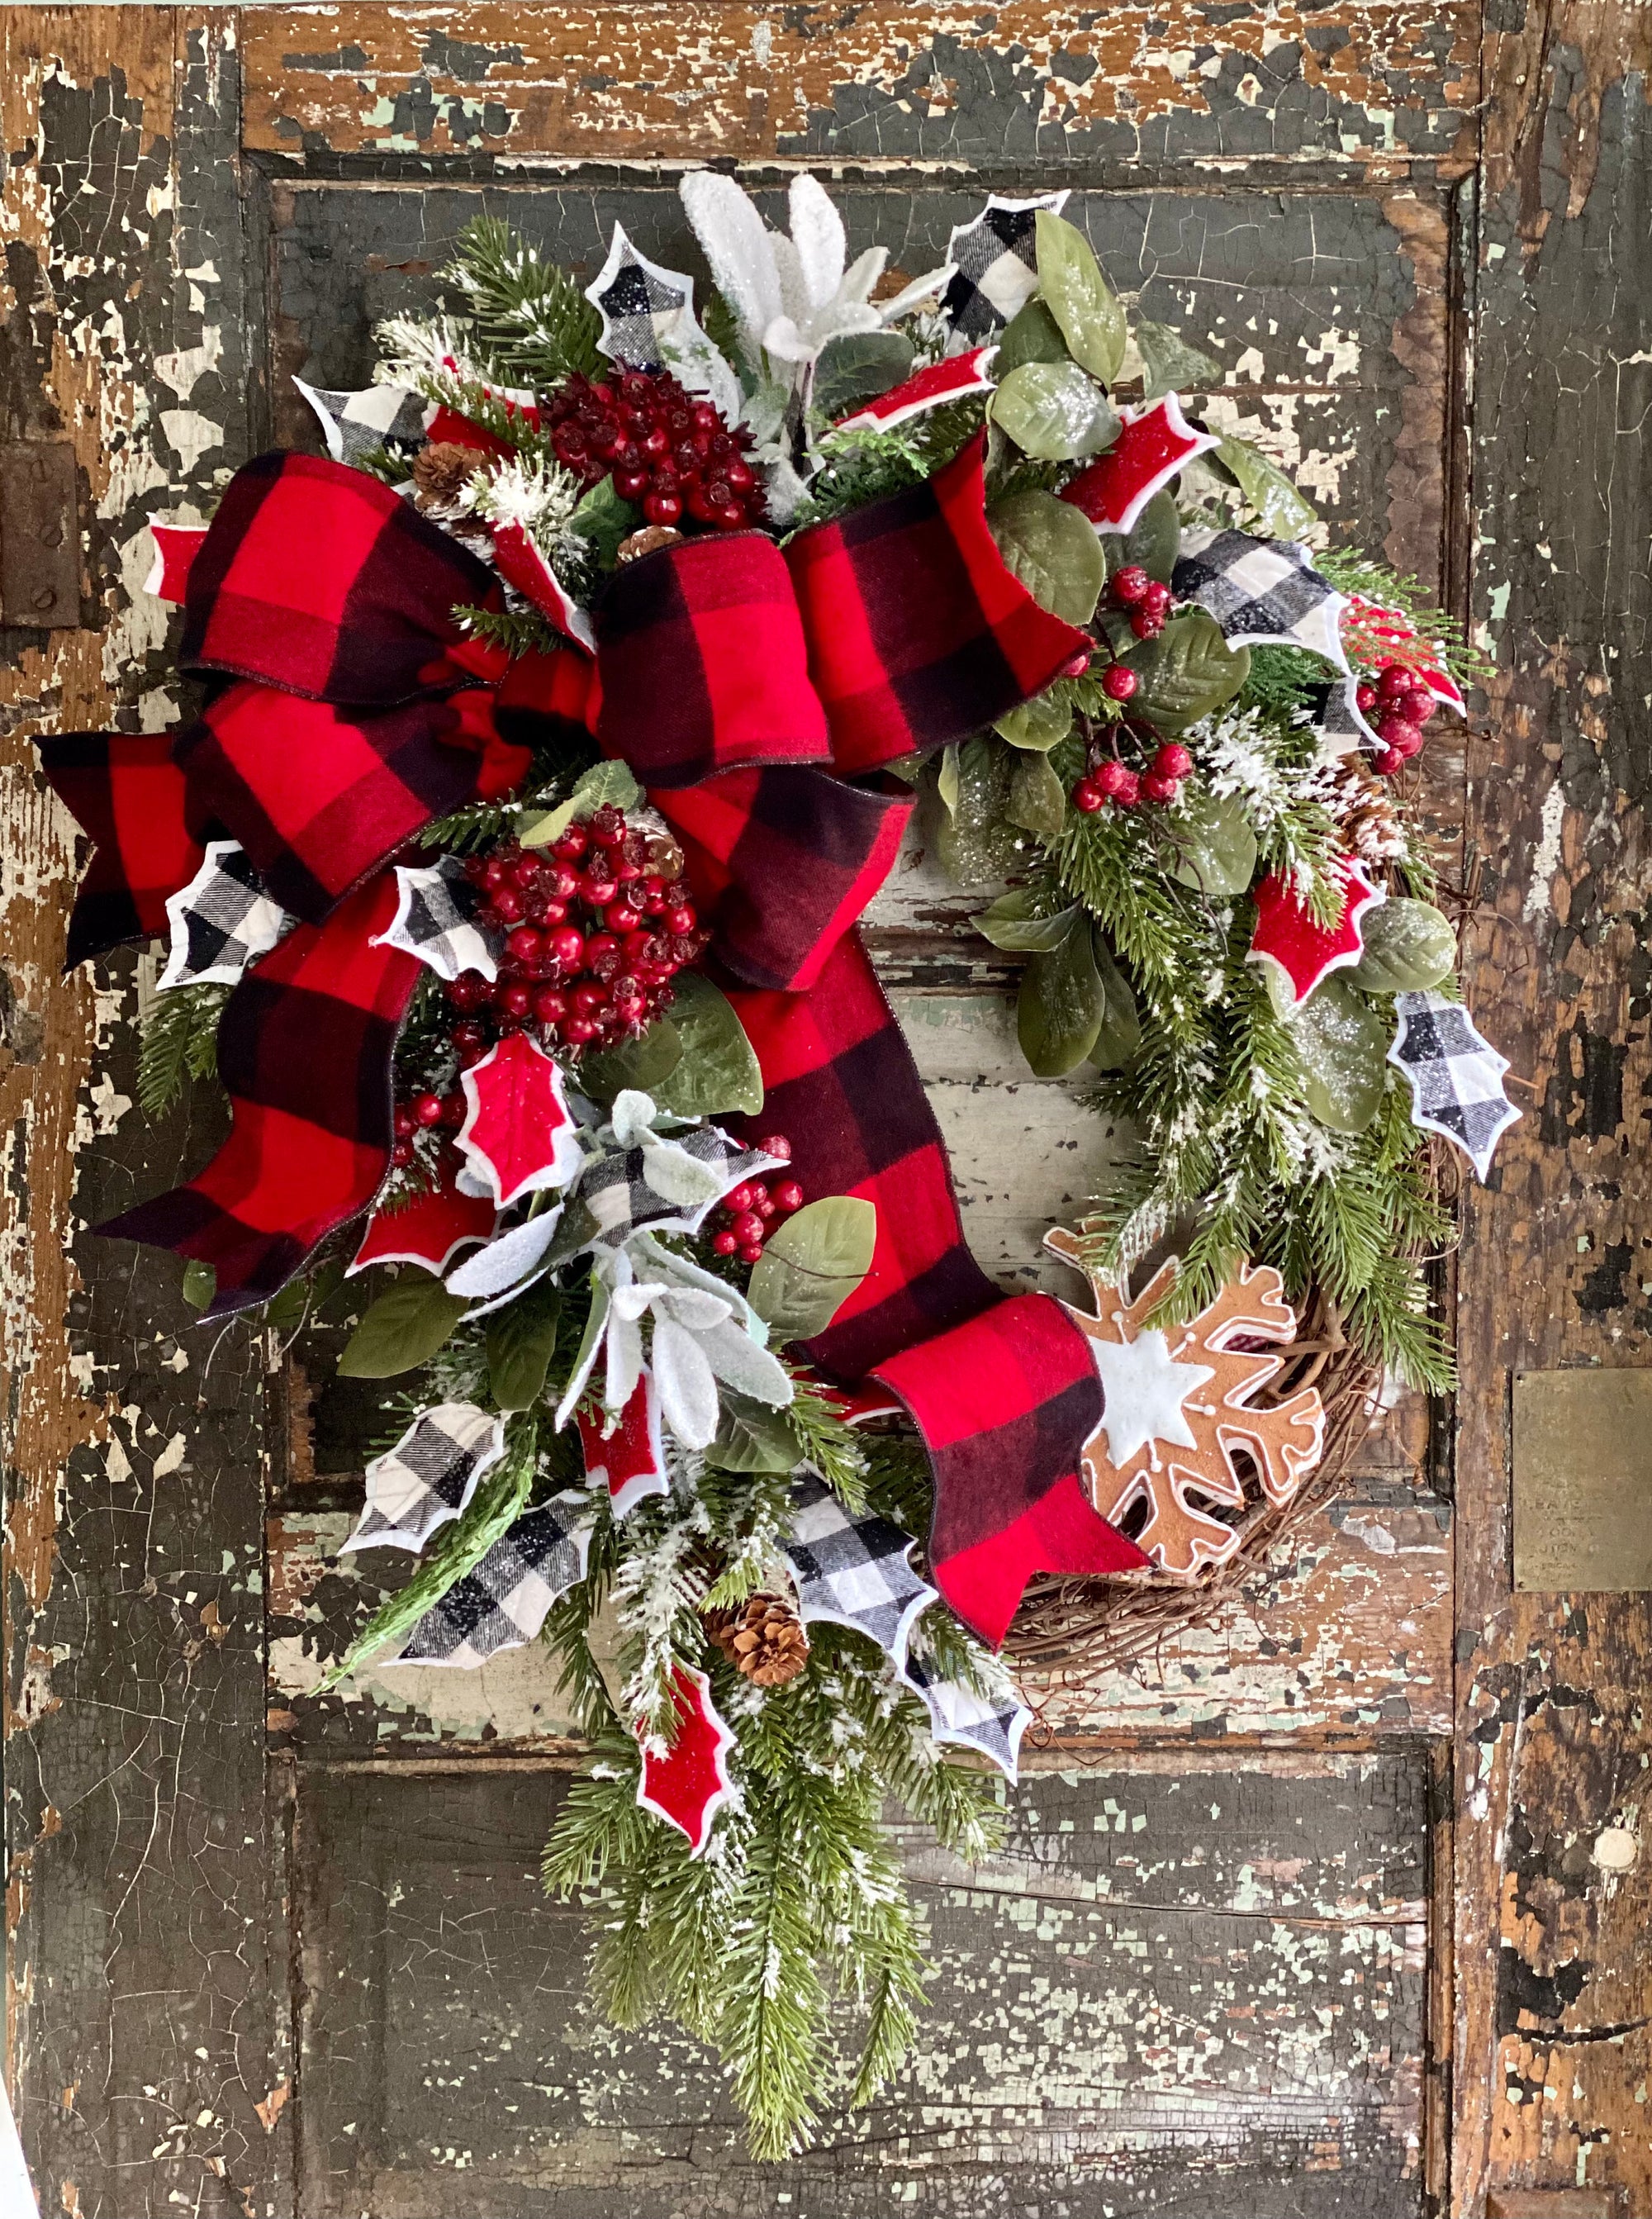 The Anise Winter Rustic Red & White Evergreen Christmas Wreath For Front Door, Farmhouse Buffalo check snowy pine wreath, cabin decor